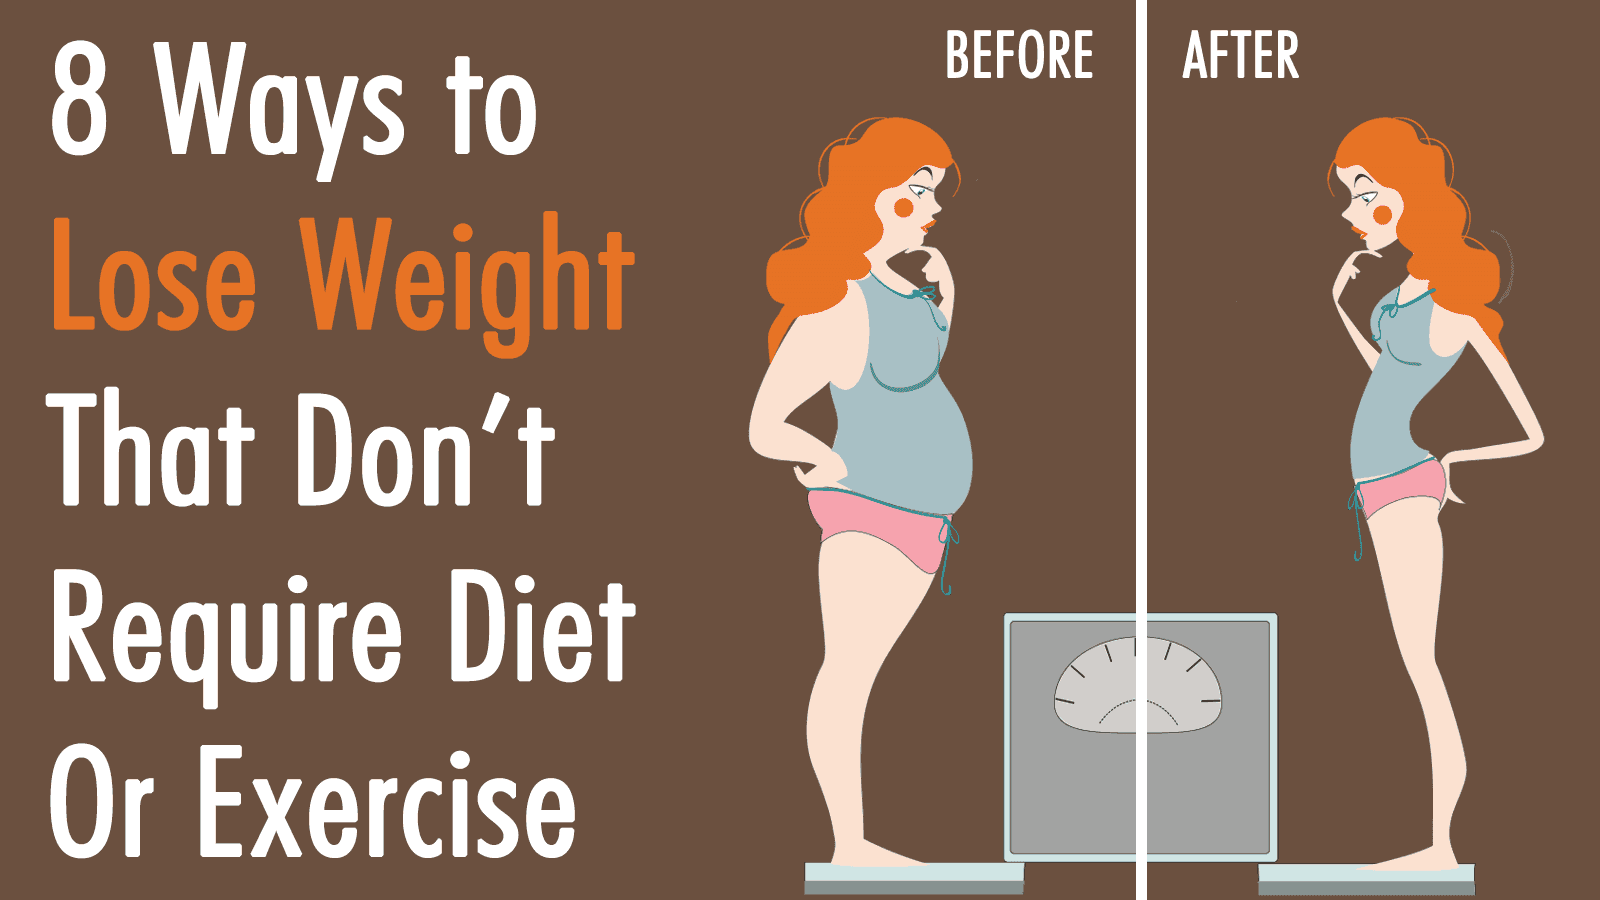 What is the quickest way to lose weight without exercise 8 Ways To Lose Weight That Don T Require Diet Or Exercise